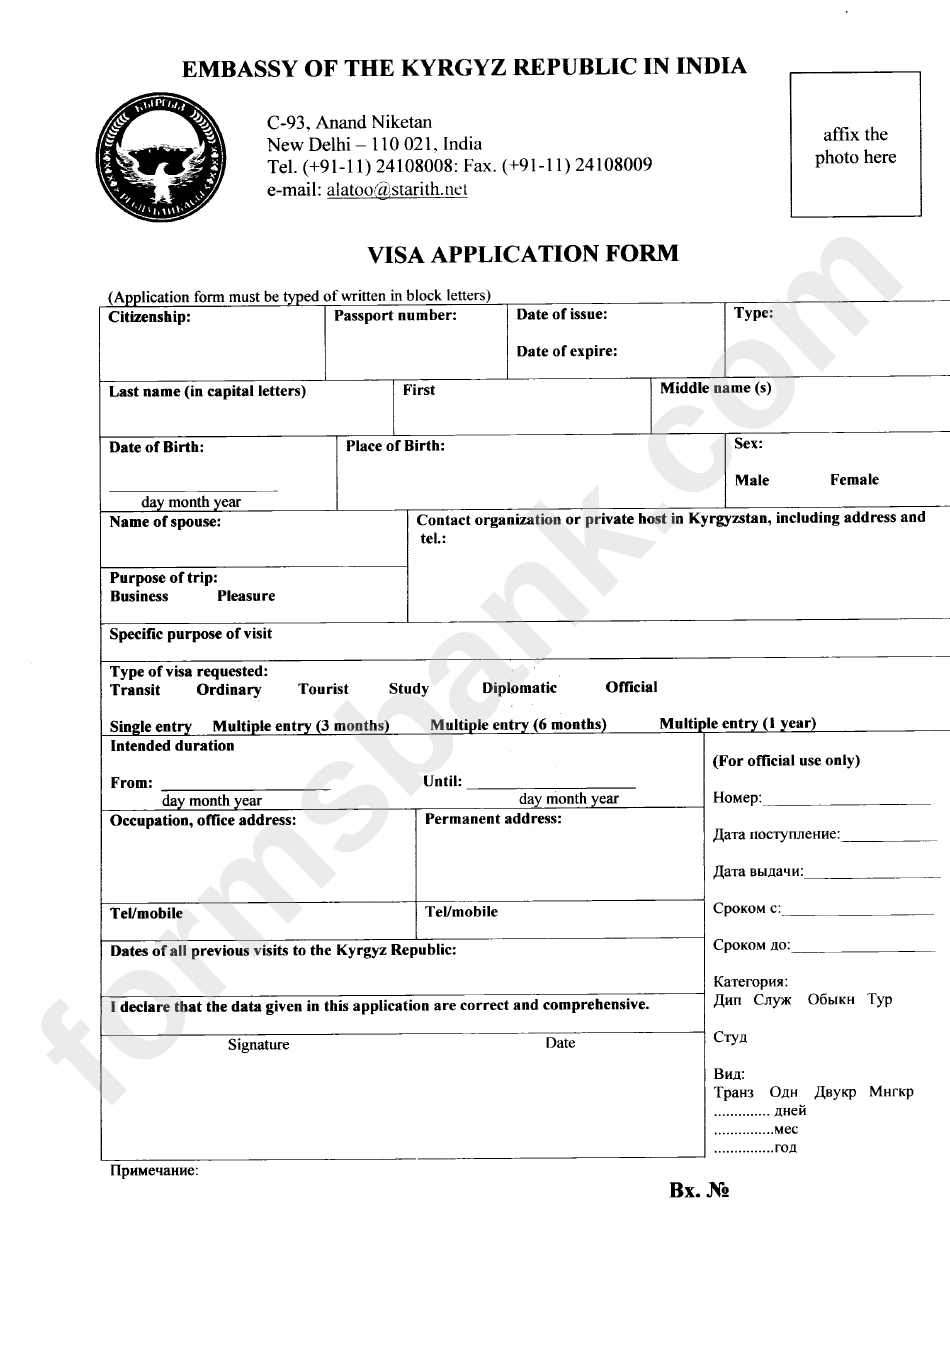 Visa Application Form - Embassy Of The Kyrgyz Republic In India